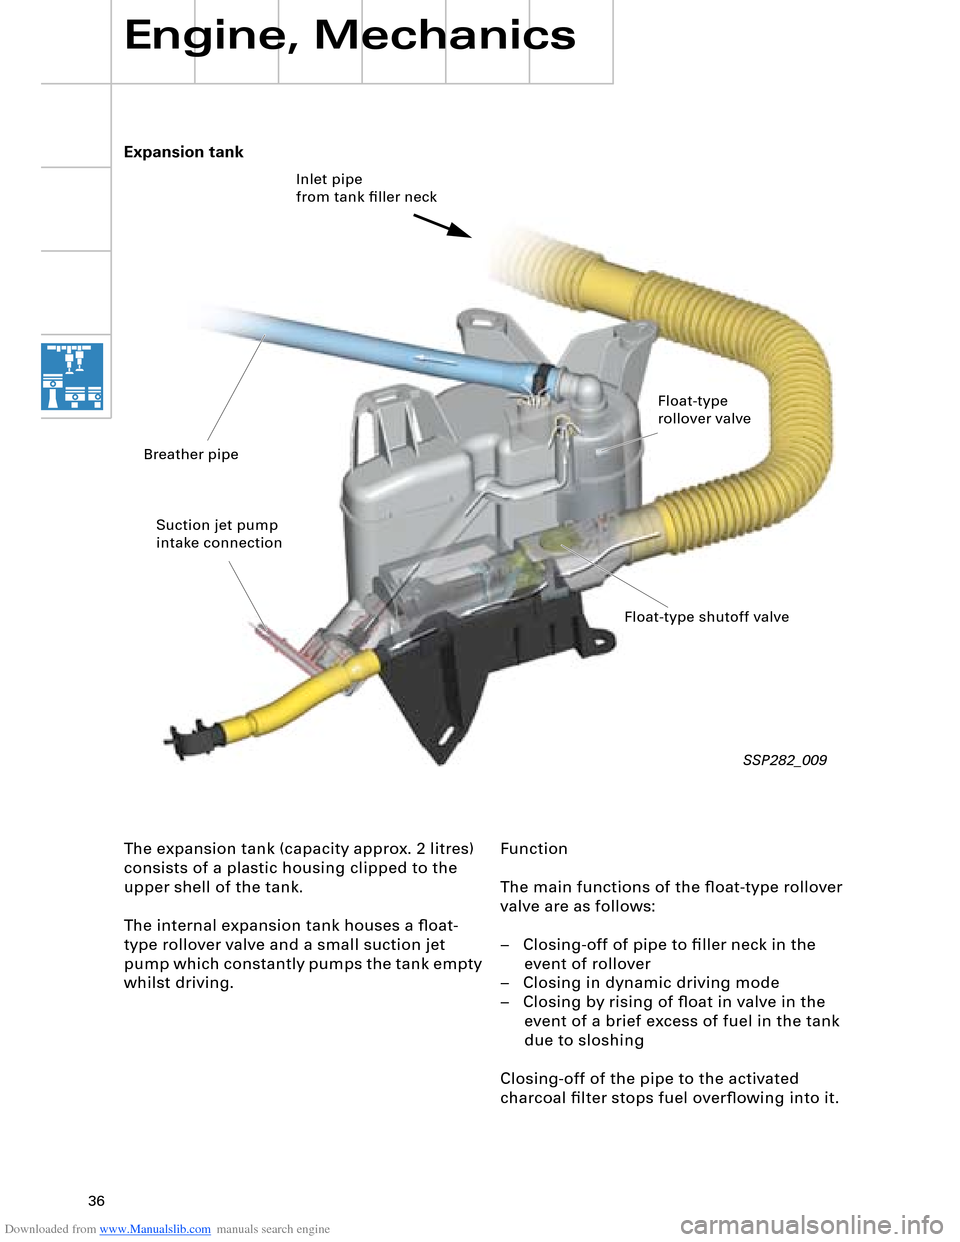 AUDI A8 2003 D3 / 2.G Technical Features Manual Downloaded from www.Manualslib.com manuals search engine 36
Engine, Mechanics
Function
The main functions of the ﬂoat-type rollover 
valve are as follows:
–   Closing-off of pipe to ﬁller neck i